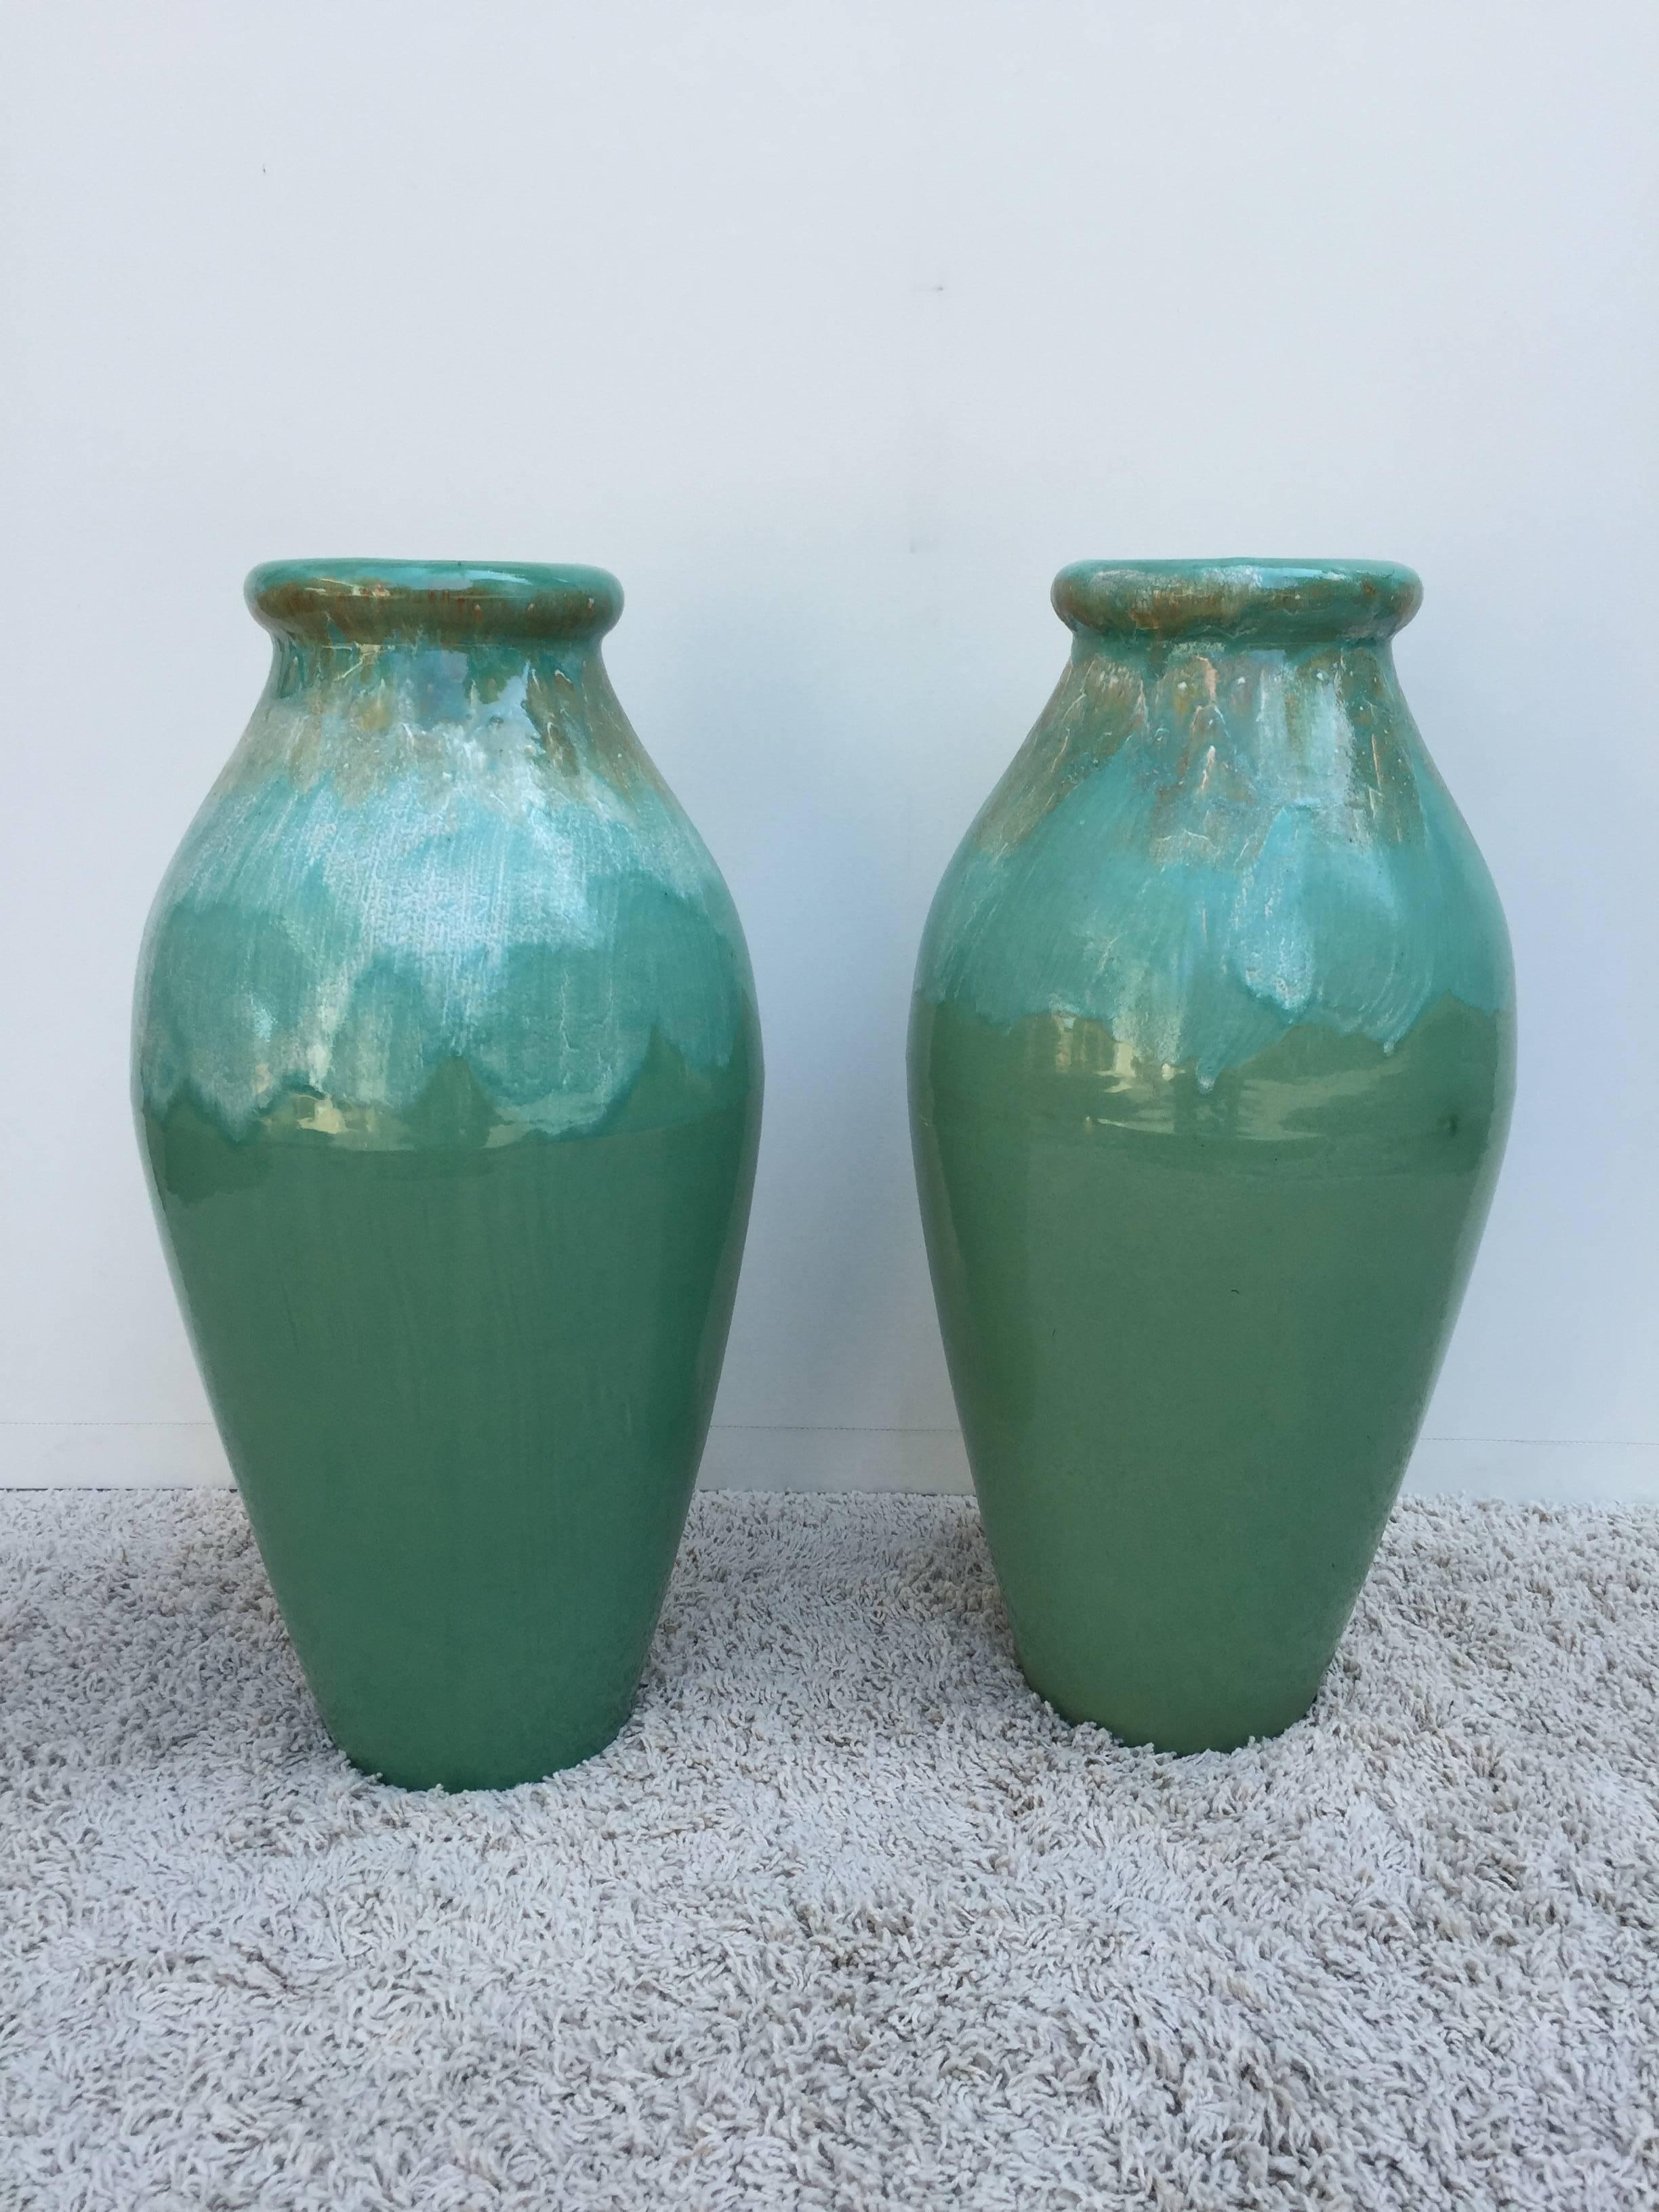 Pair of extra large Roseville Co ceramic jardiniers hand glazed and custom-made stamped Roseville USA RRP Co, on bottom. Beautiful two tone turquoise and beige/creme glaze finish.